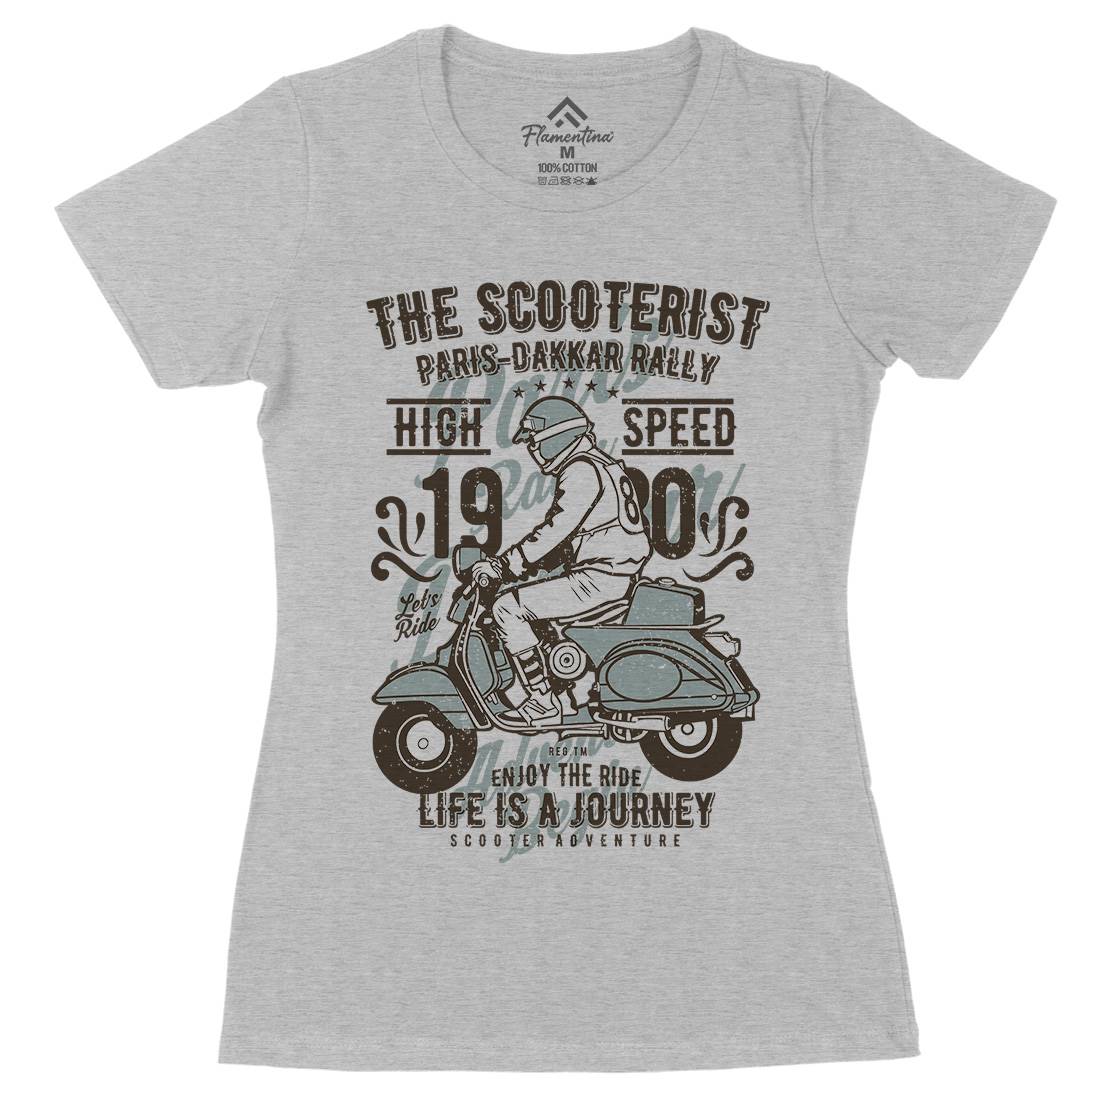 Scooterist 1980 Womens Organic Crew Neck T-Shirt Motorcycles A774